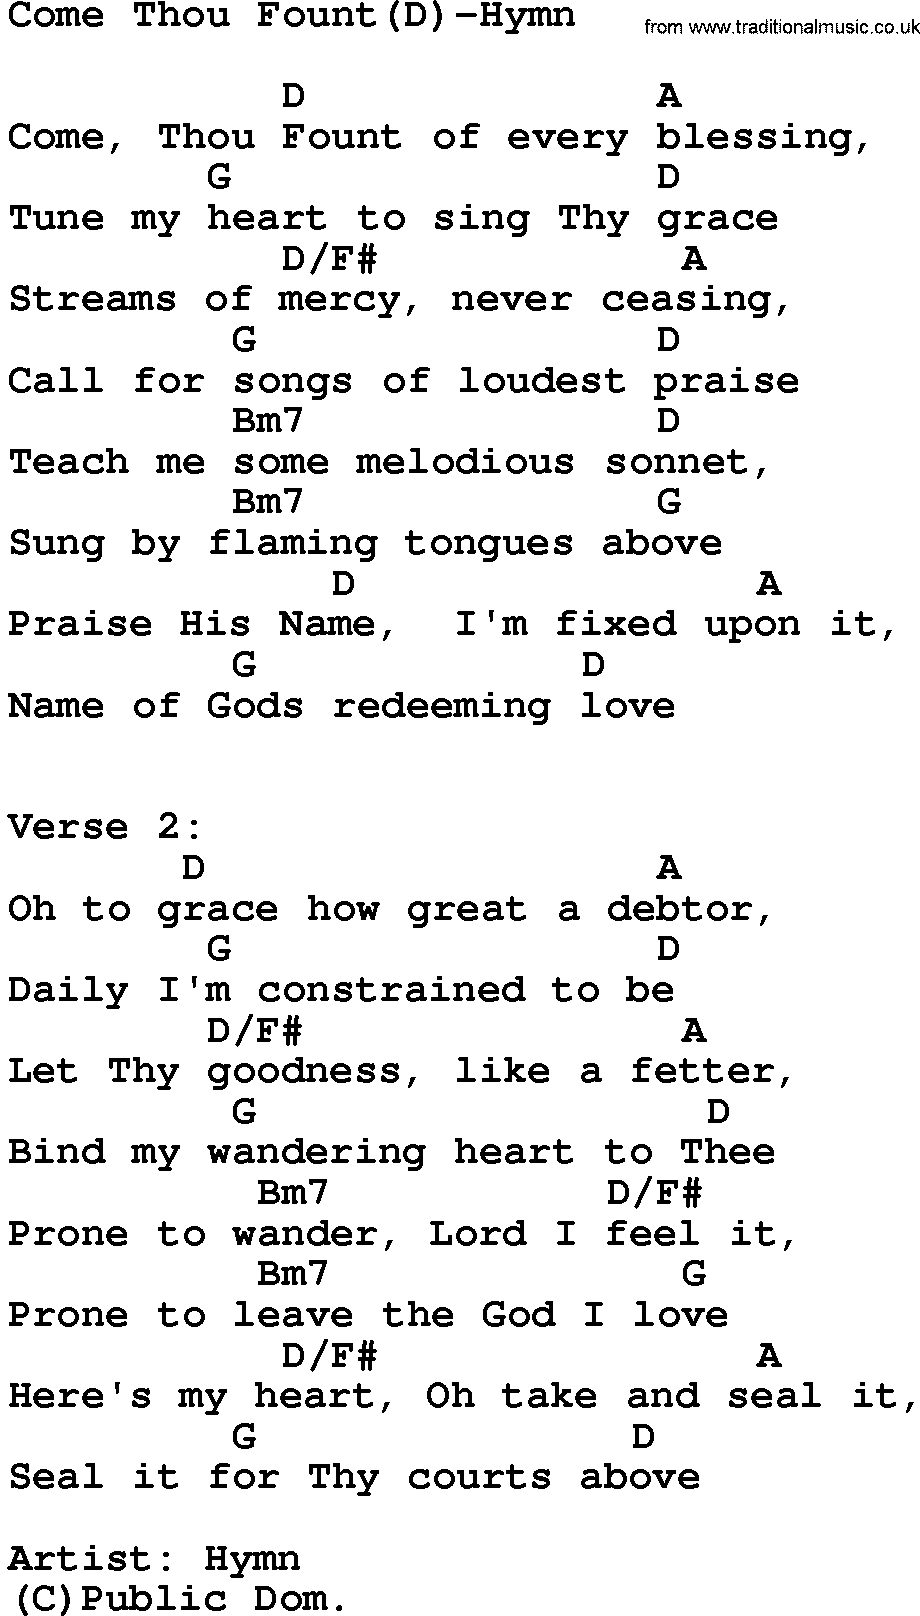 Gospel Song: Come Thou Fount(D)-Hymn, lyrics and chords.